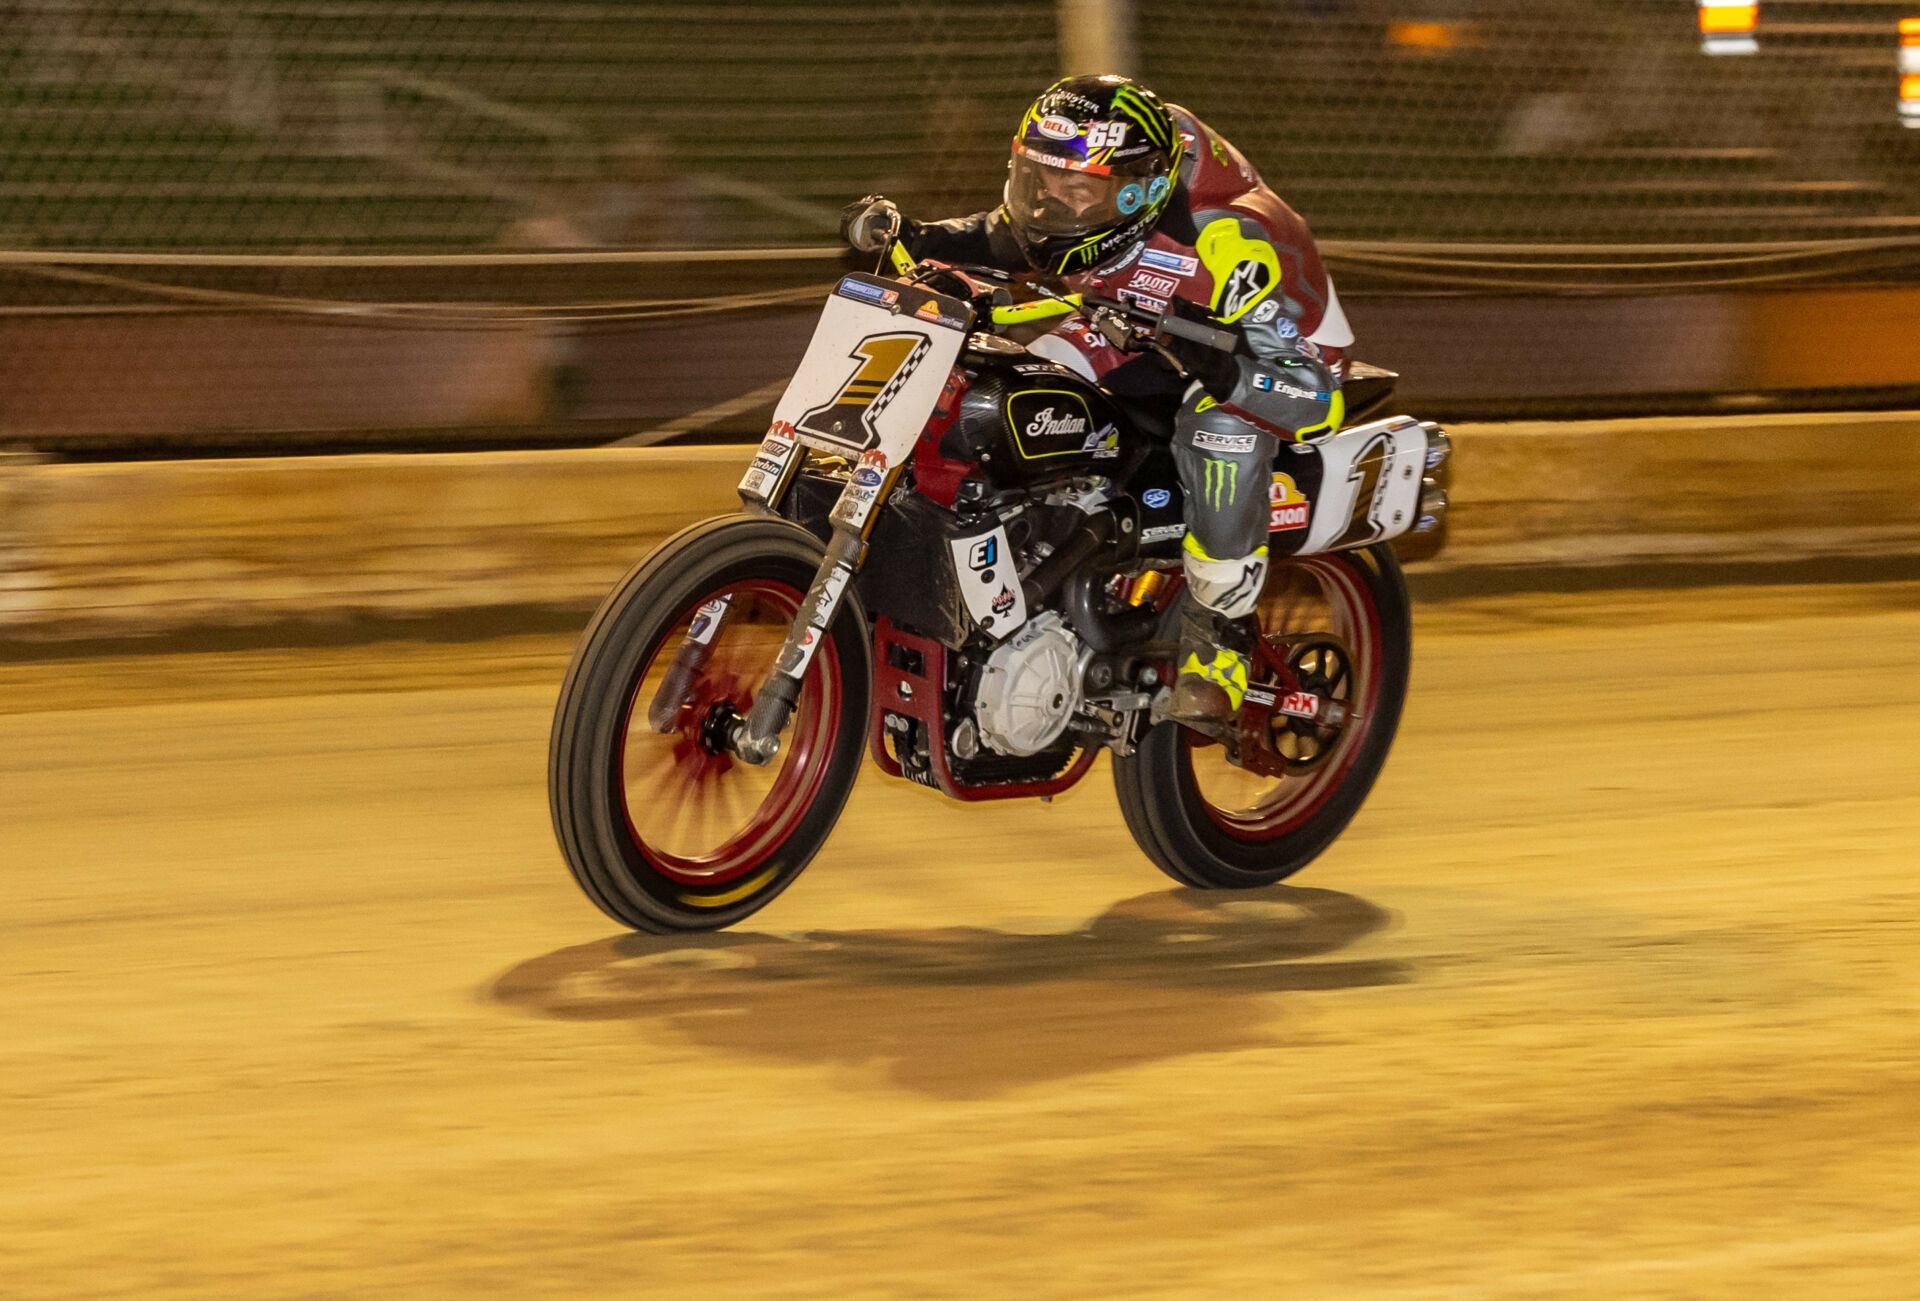 Jared Mees (1) at the DuQuoin Mile. Photo by Tim Lester, courtesy AFT.